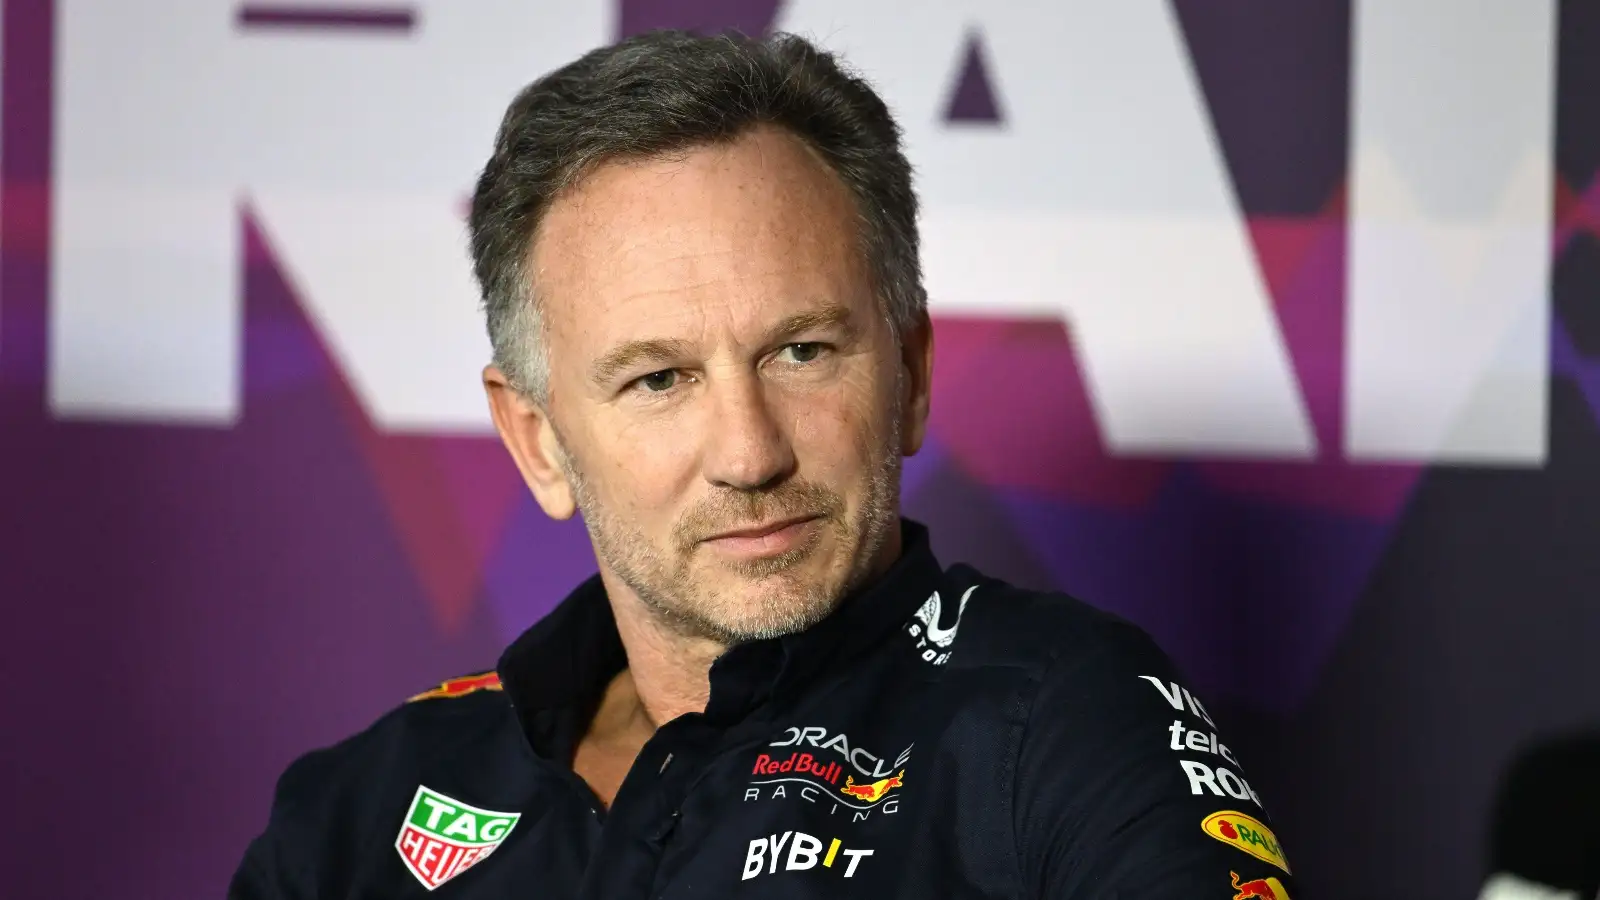 Horner Responds to Wolff's Concerns Over Staff Loss